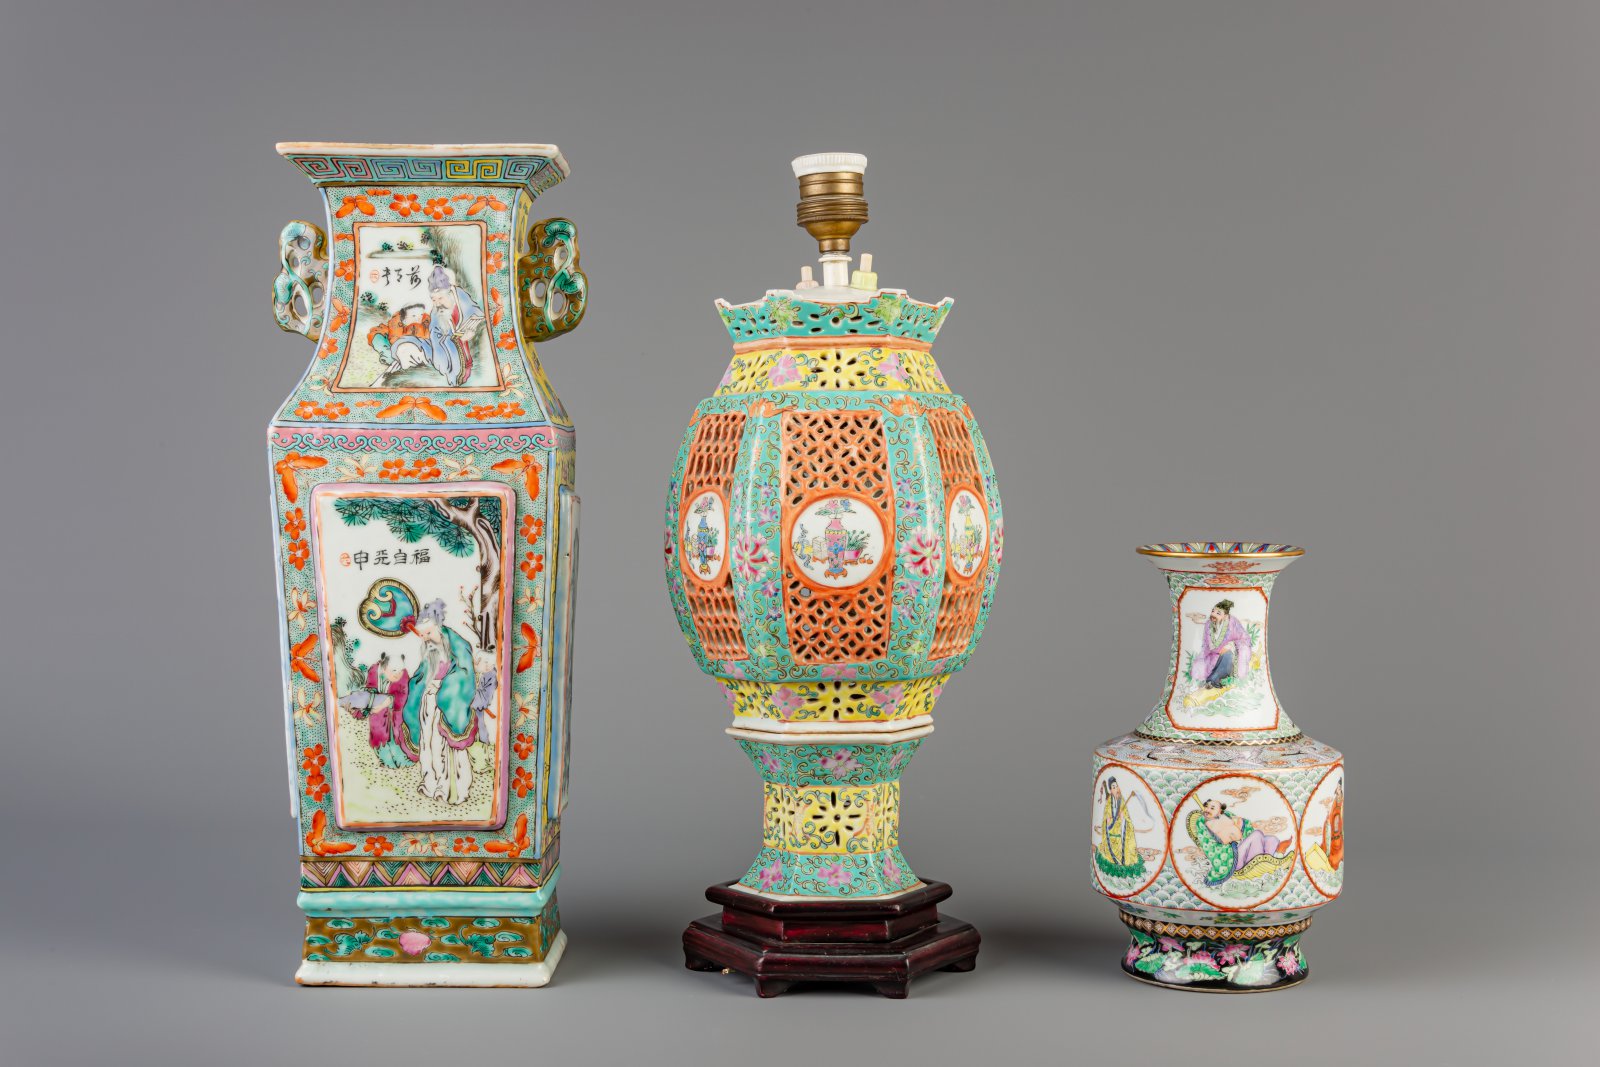 A Chinese famille rose lantern, an 'Immortals' vase and a vase with sages, 19th and 20th C. - Image 4 of 7